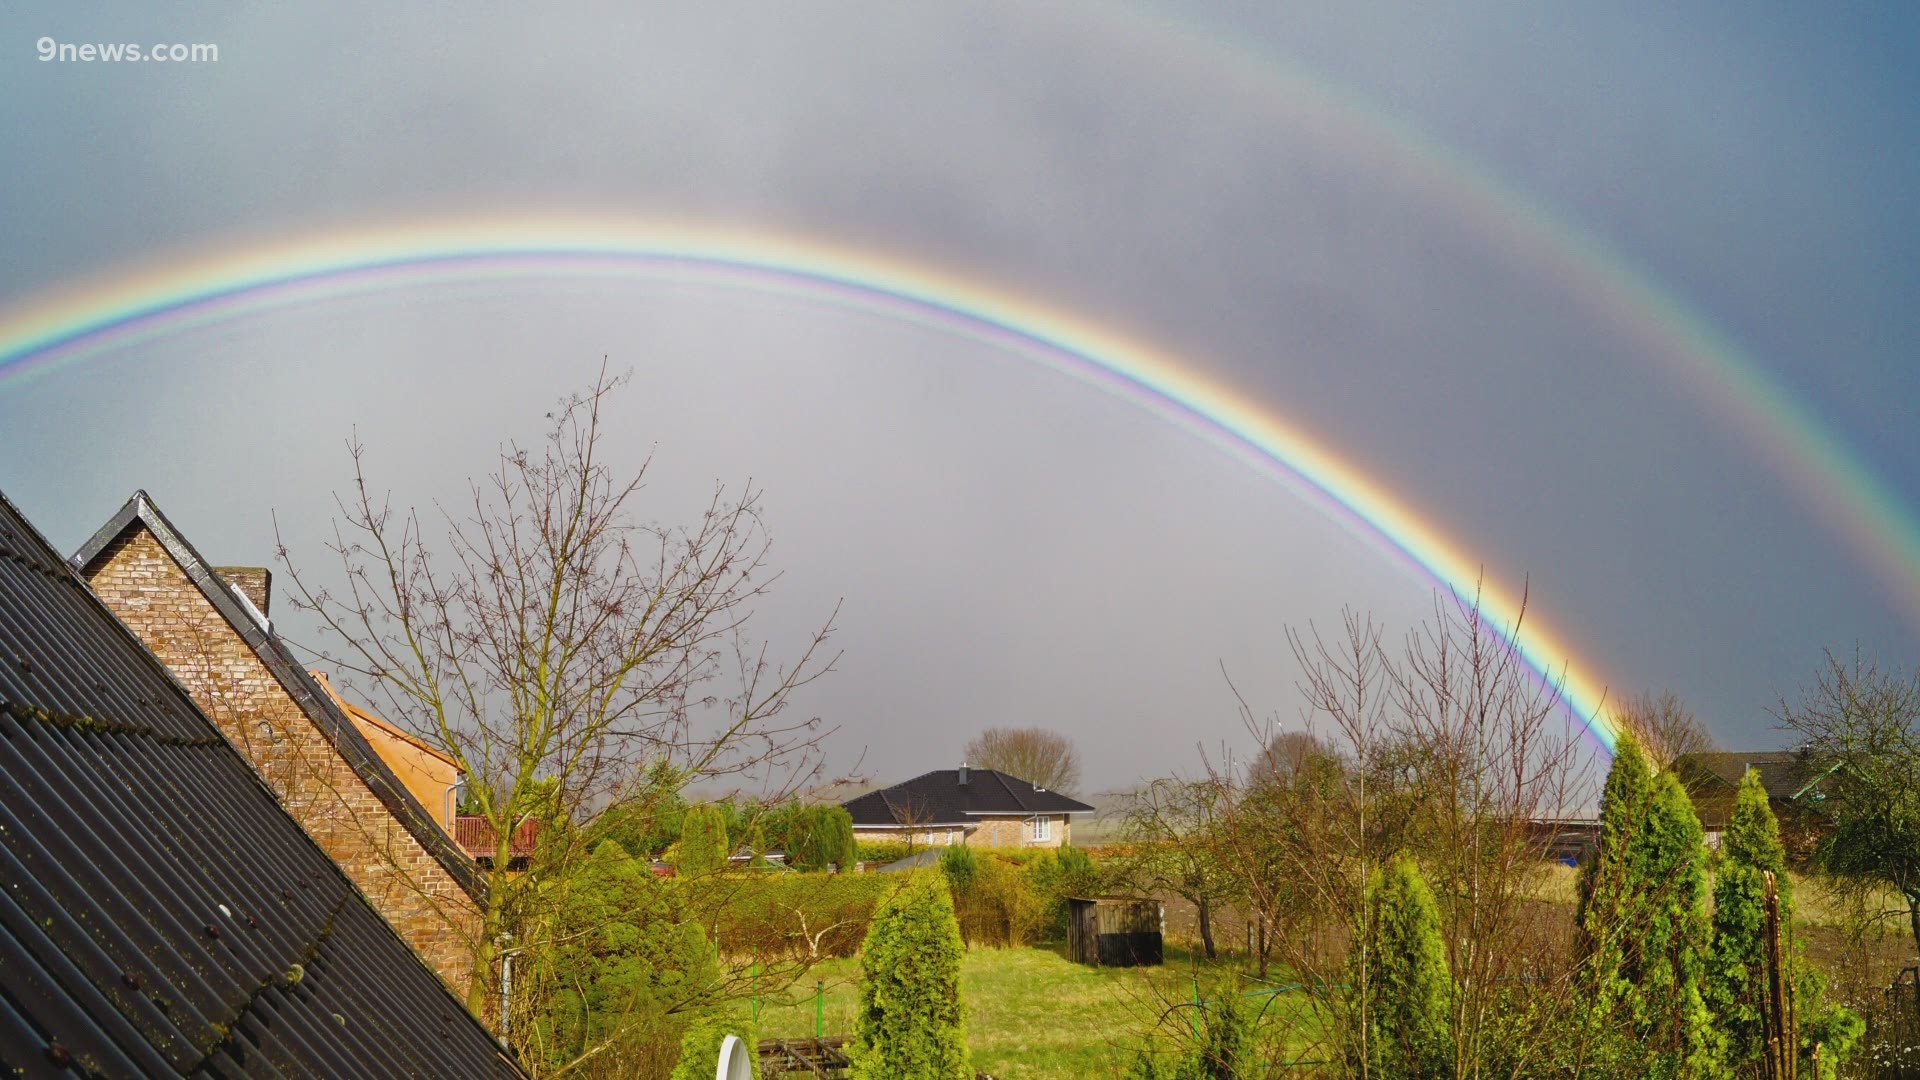 The science behind color patterns in a double rainbow